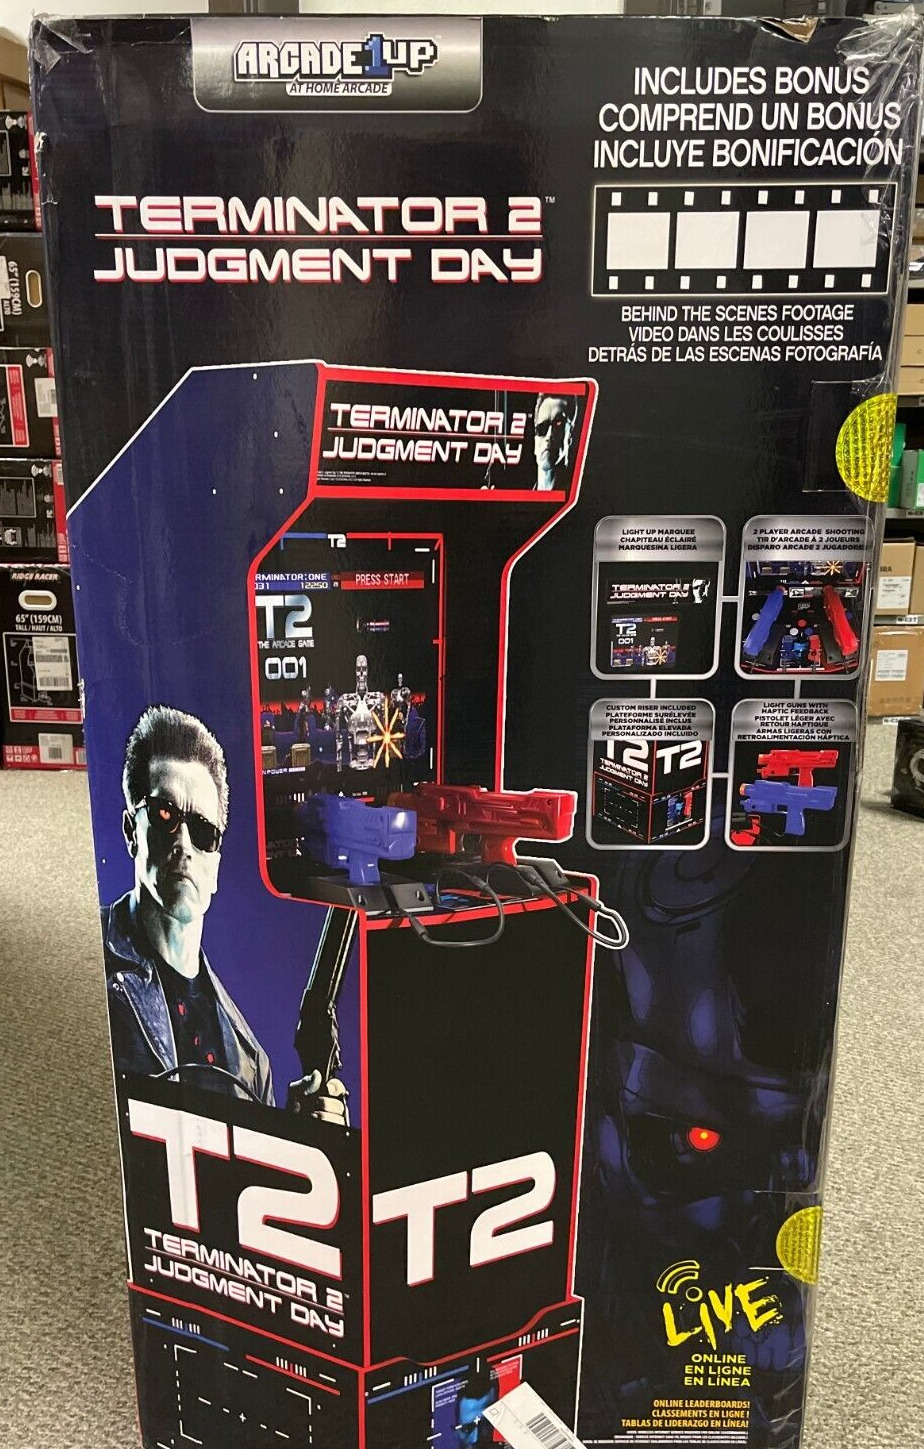 Arcade1UP Terminator 2 Judgment Day Arcade with Riser and Lit Marquee - NEW